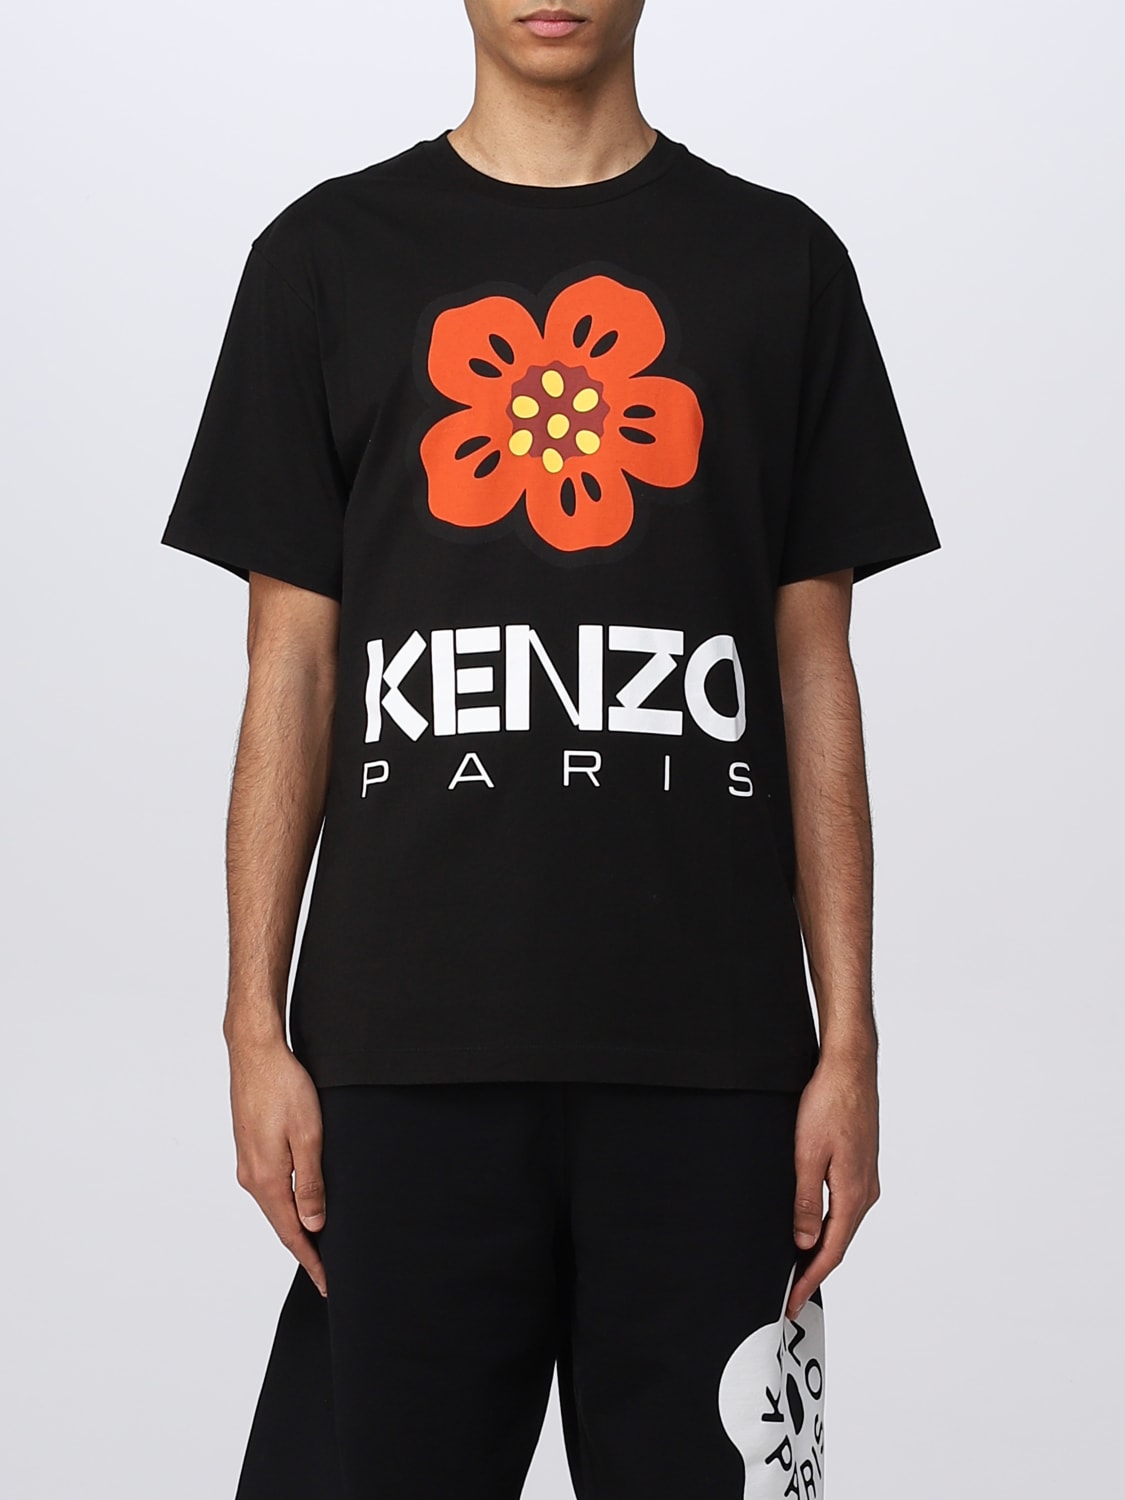 kenzo outlet online